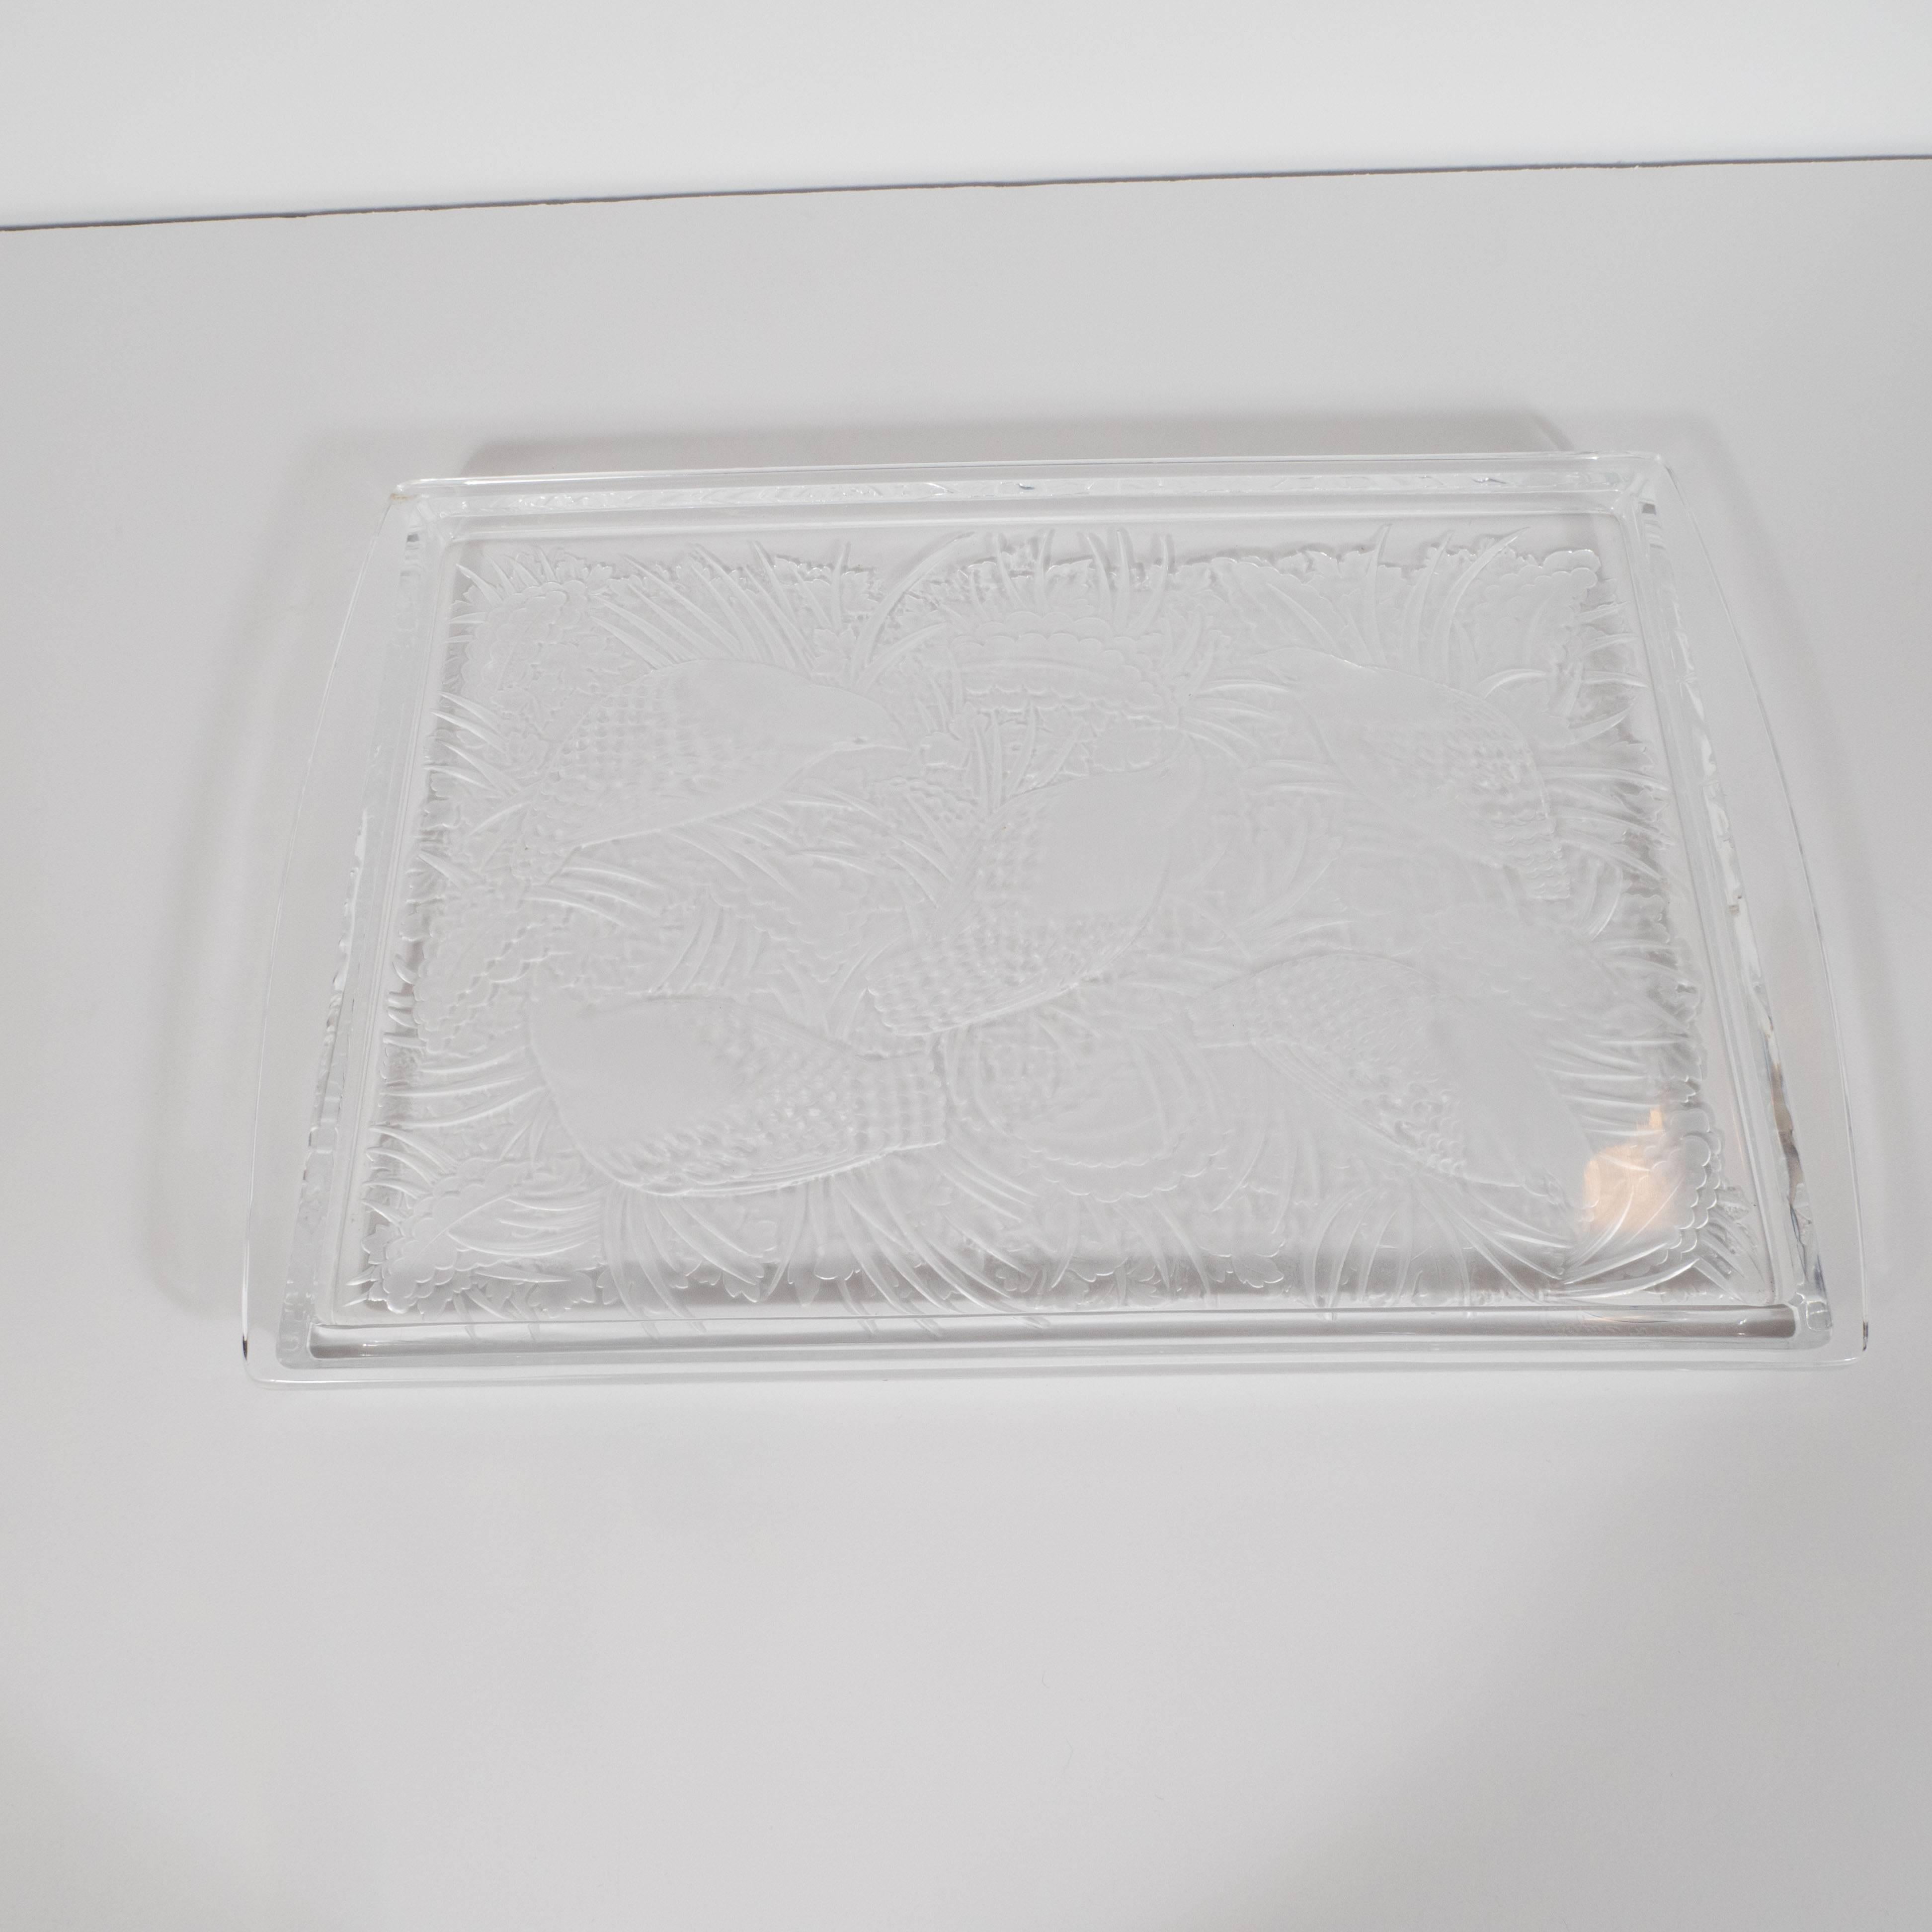 This exquisite Art Deco style tray features five quails set against an abundance of foliage in a perdrix pattern that suggests endless repetition, beyond the parameters of the rectangular tray, in the manner of M.C. Escher. The tray features raised